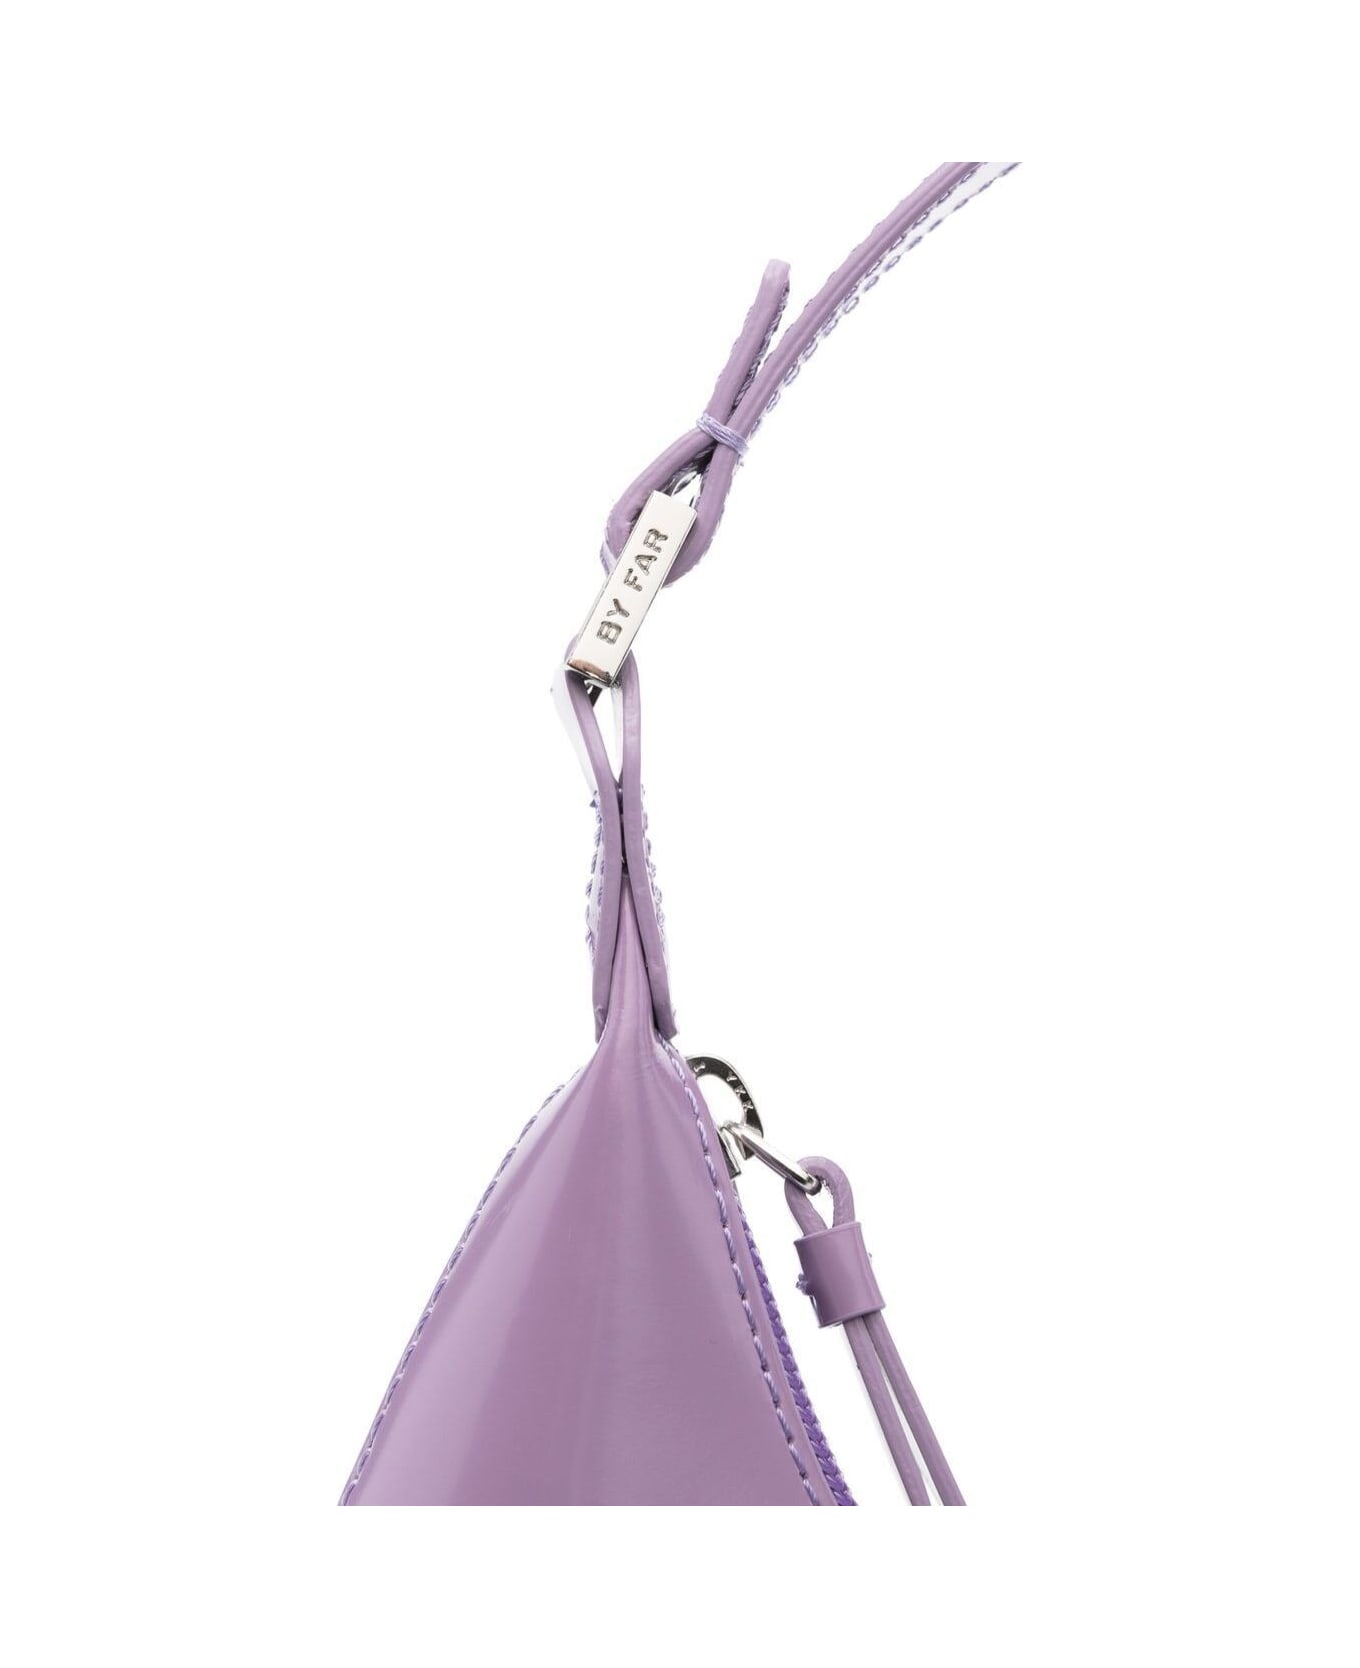 BY FAR 'baby Amber' Light Purple Shoulder Bag In Shiny Leather Woman By Far - Violet トートバッグ